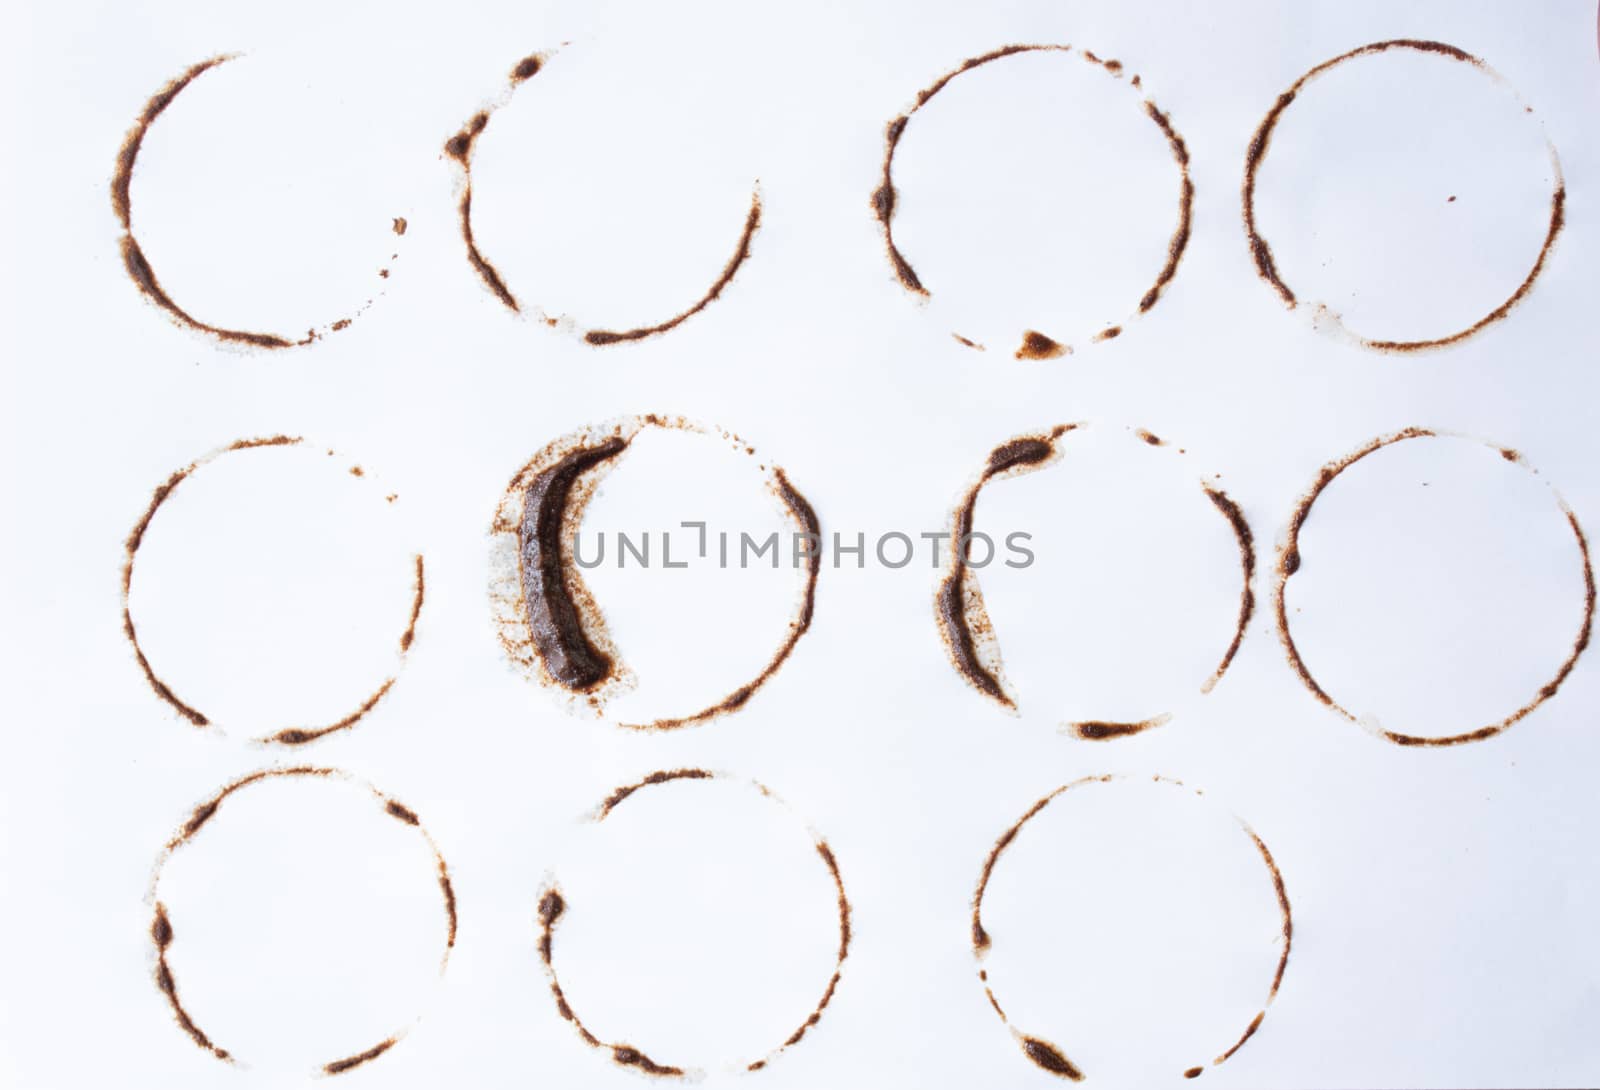 Coffee stains on white background. multiple shapes